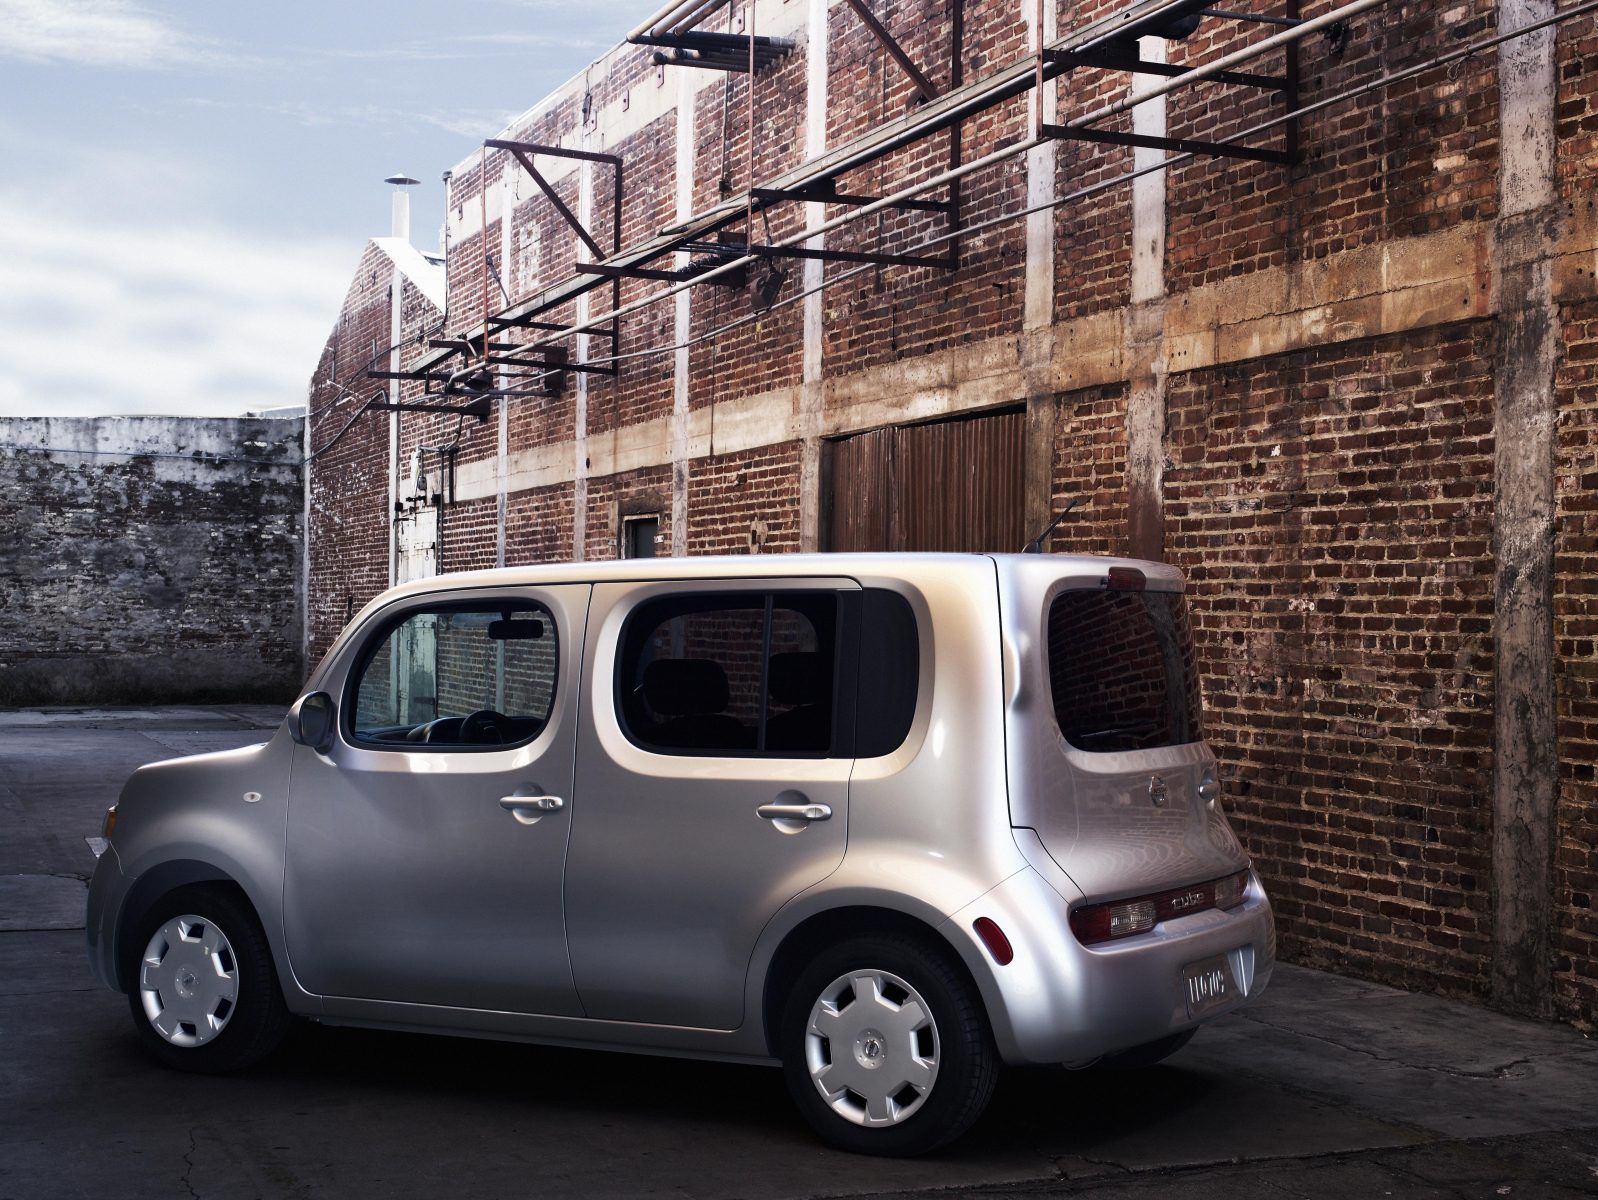 Rear and side view of an Nissan Cube